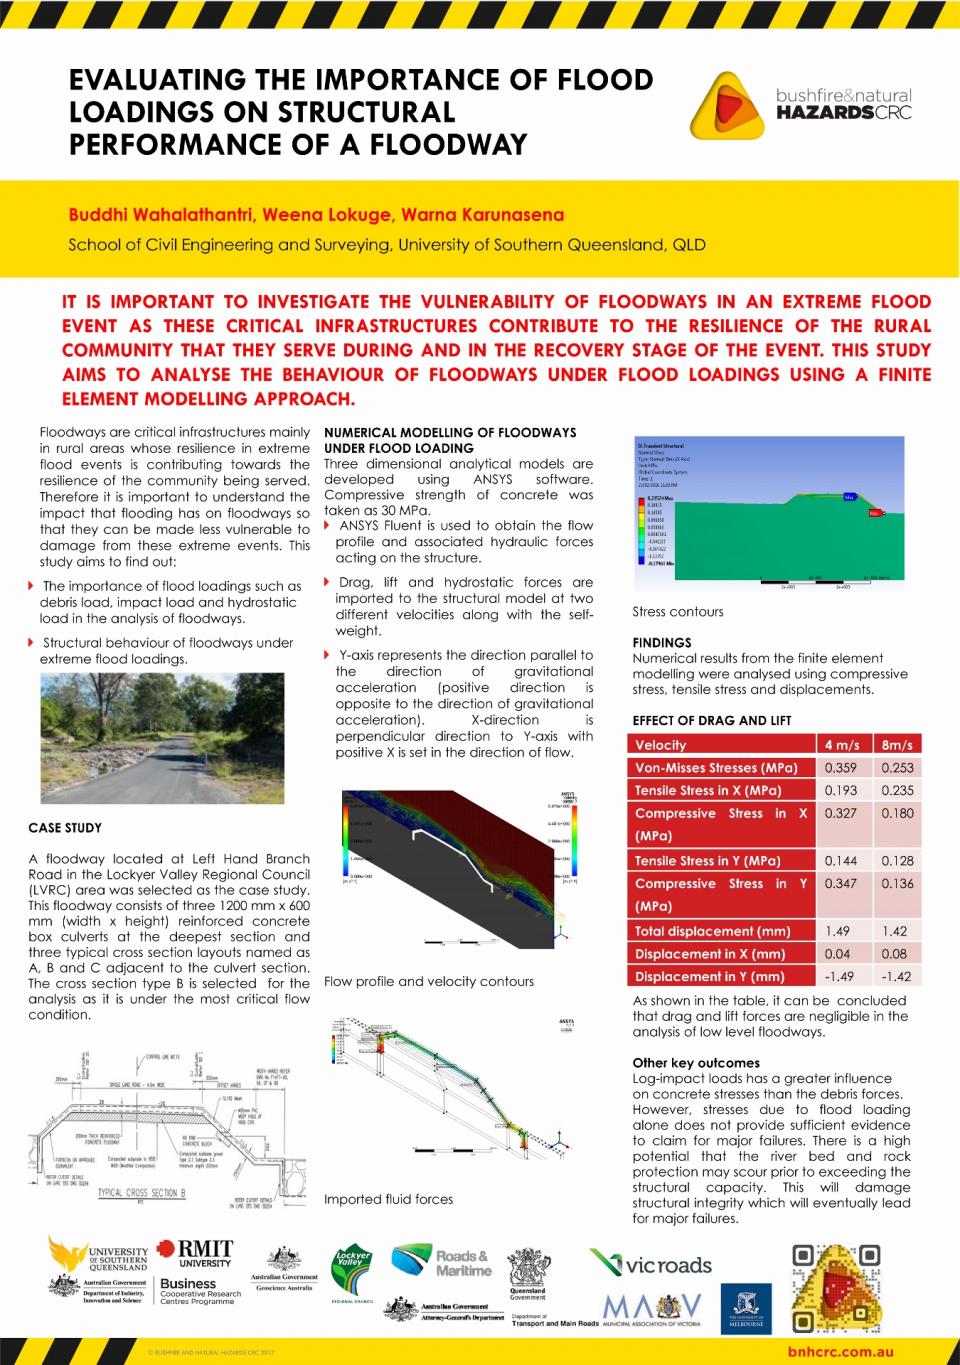 Evaluating the performance of flood loadings on structural performance of a floodway